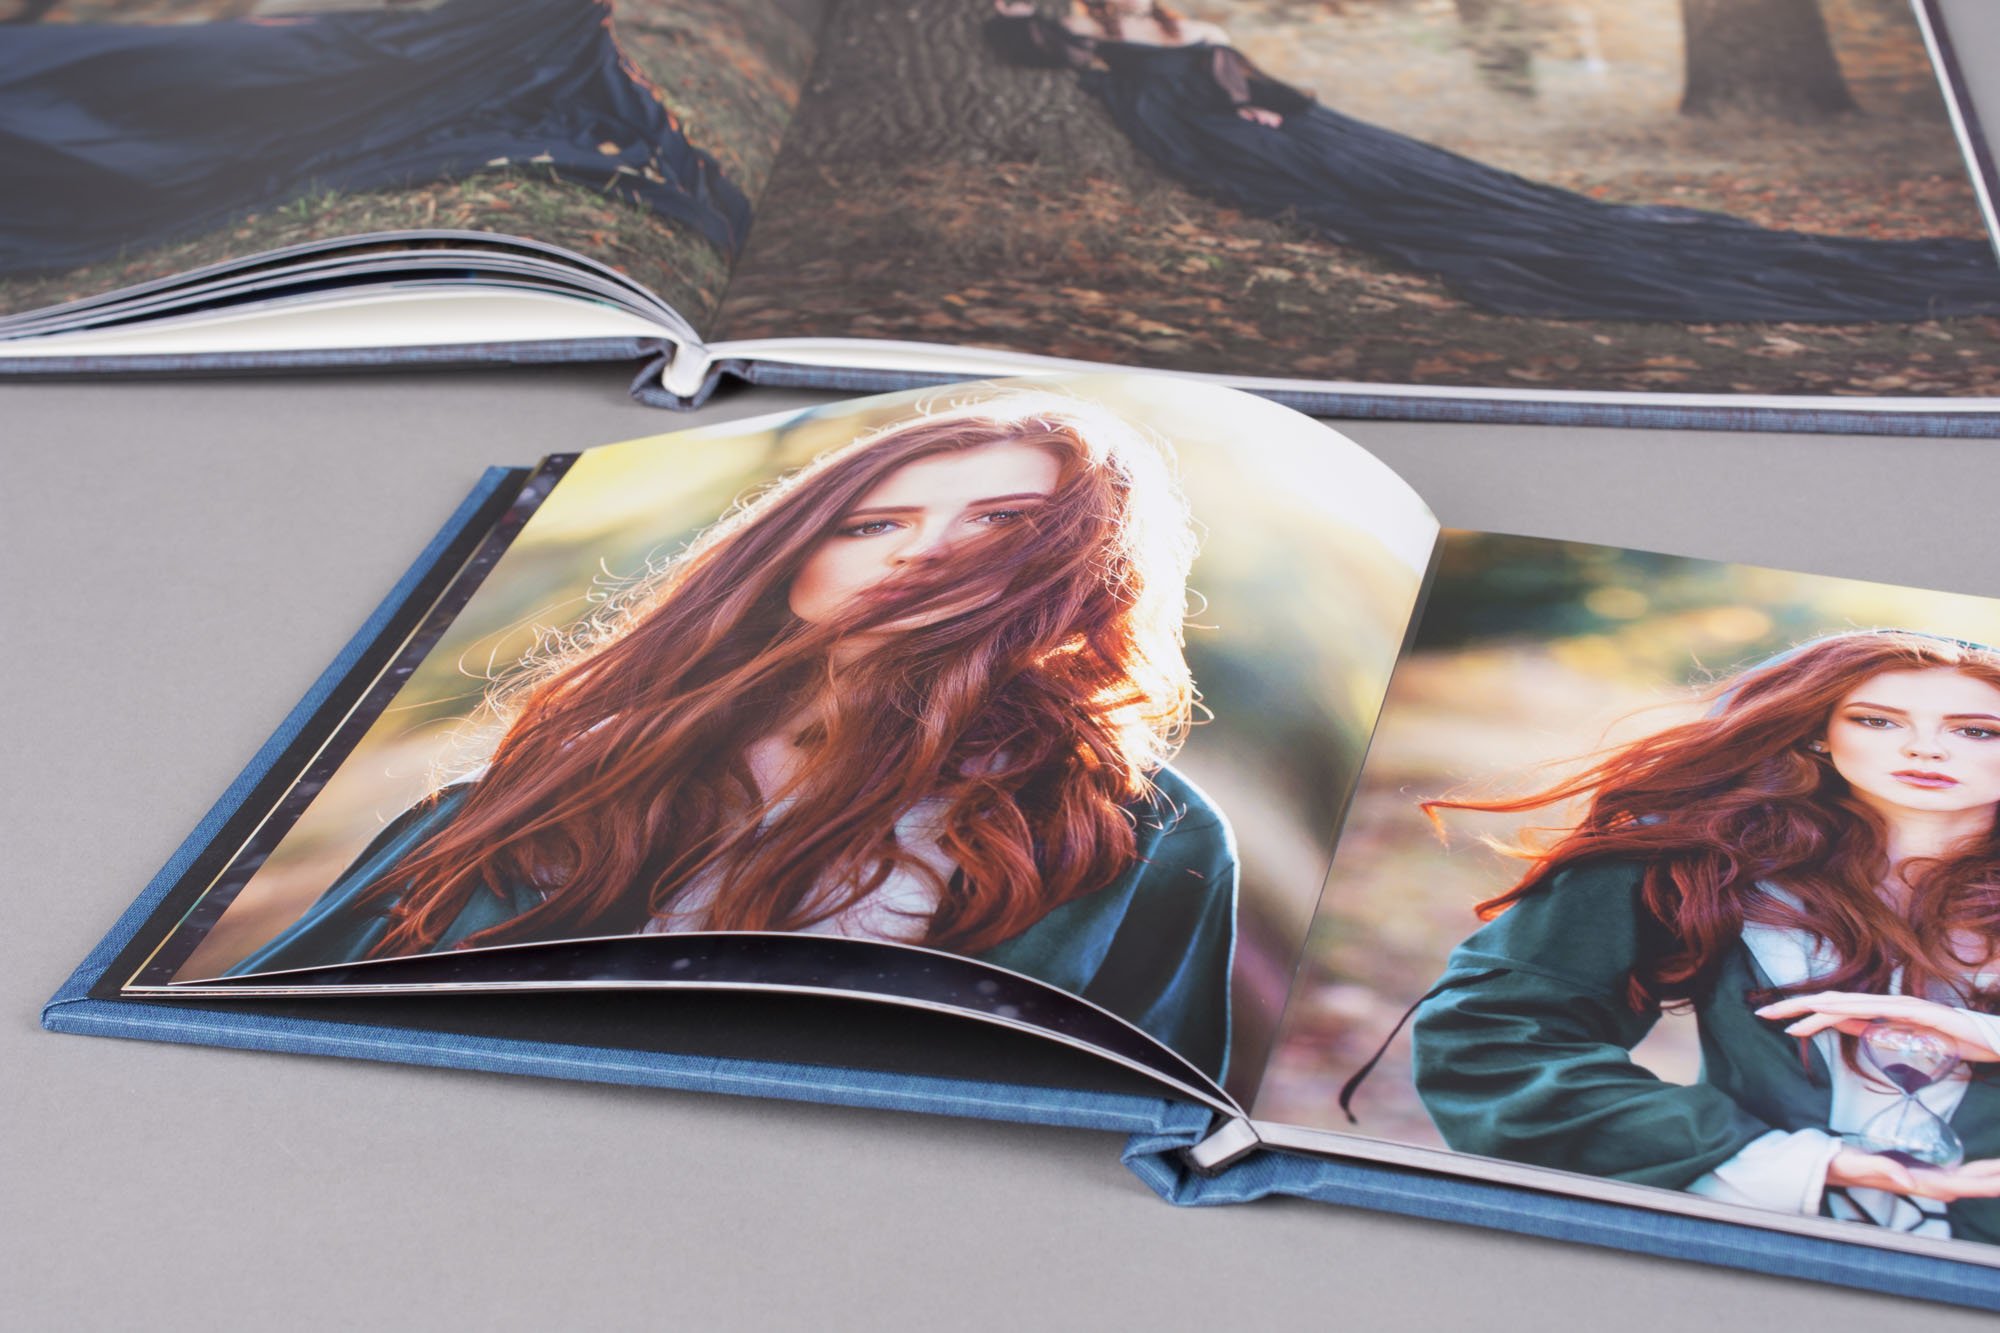 Dreambook 4k highest quality layflat book hardcover book soft paged professional themed photo session.jpg